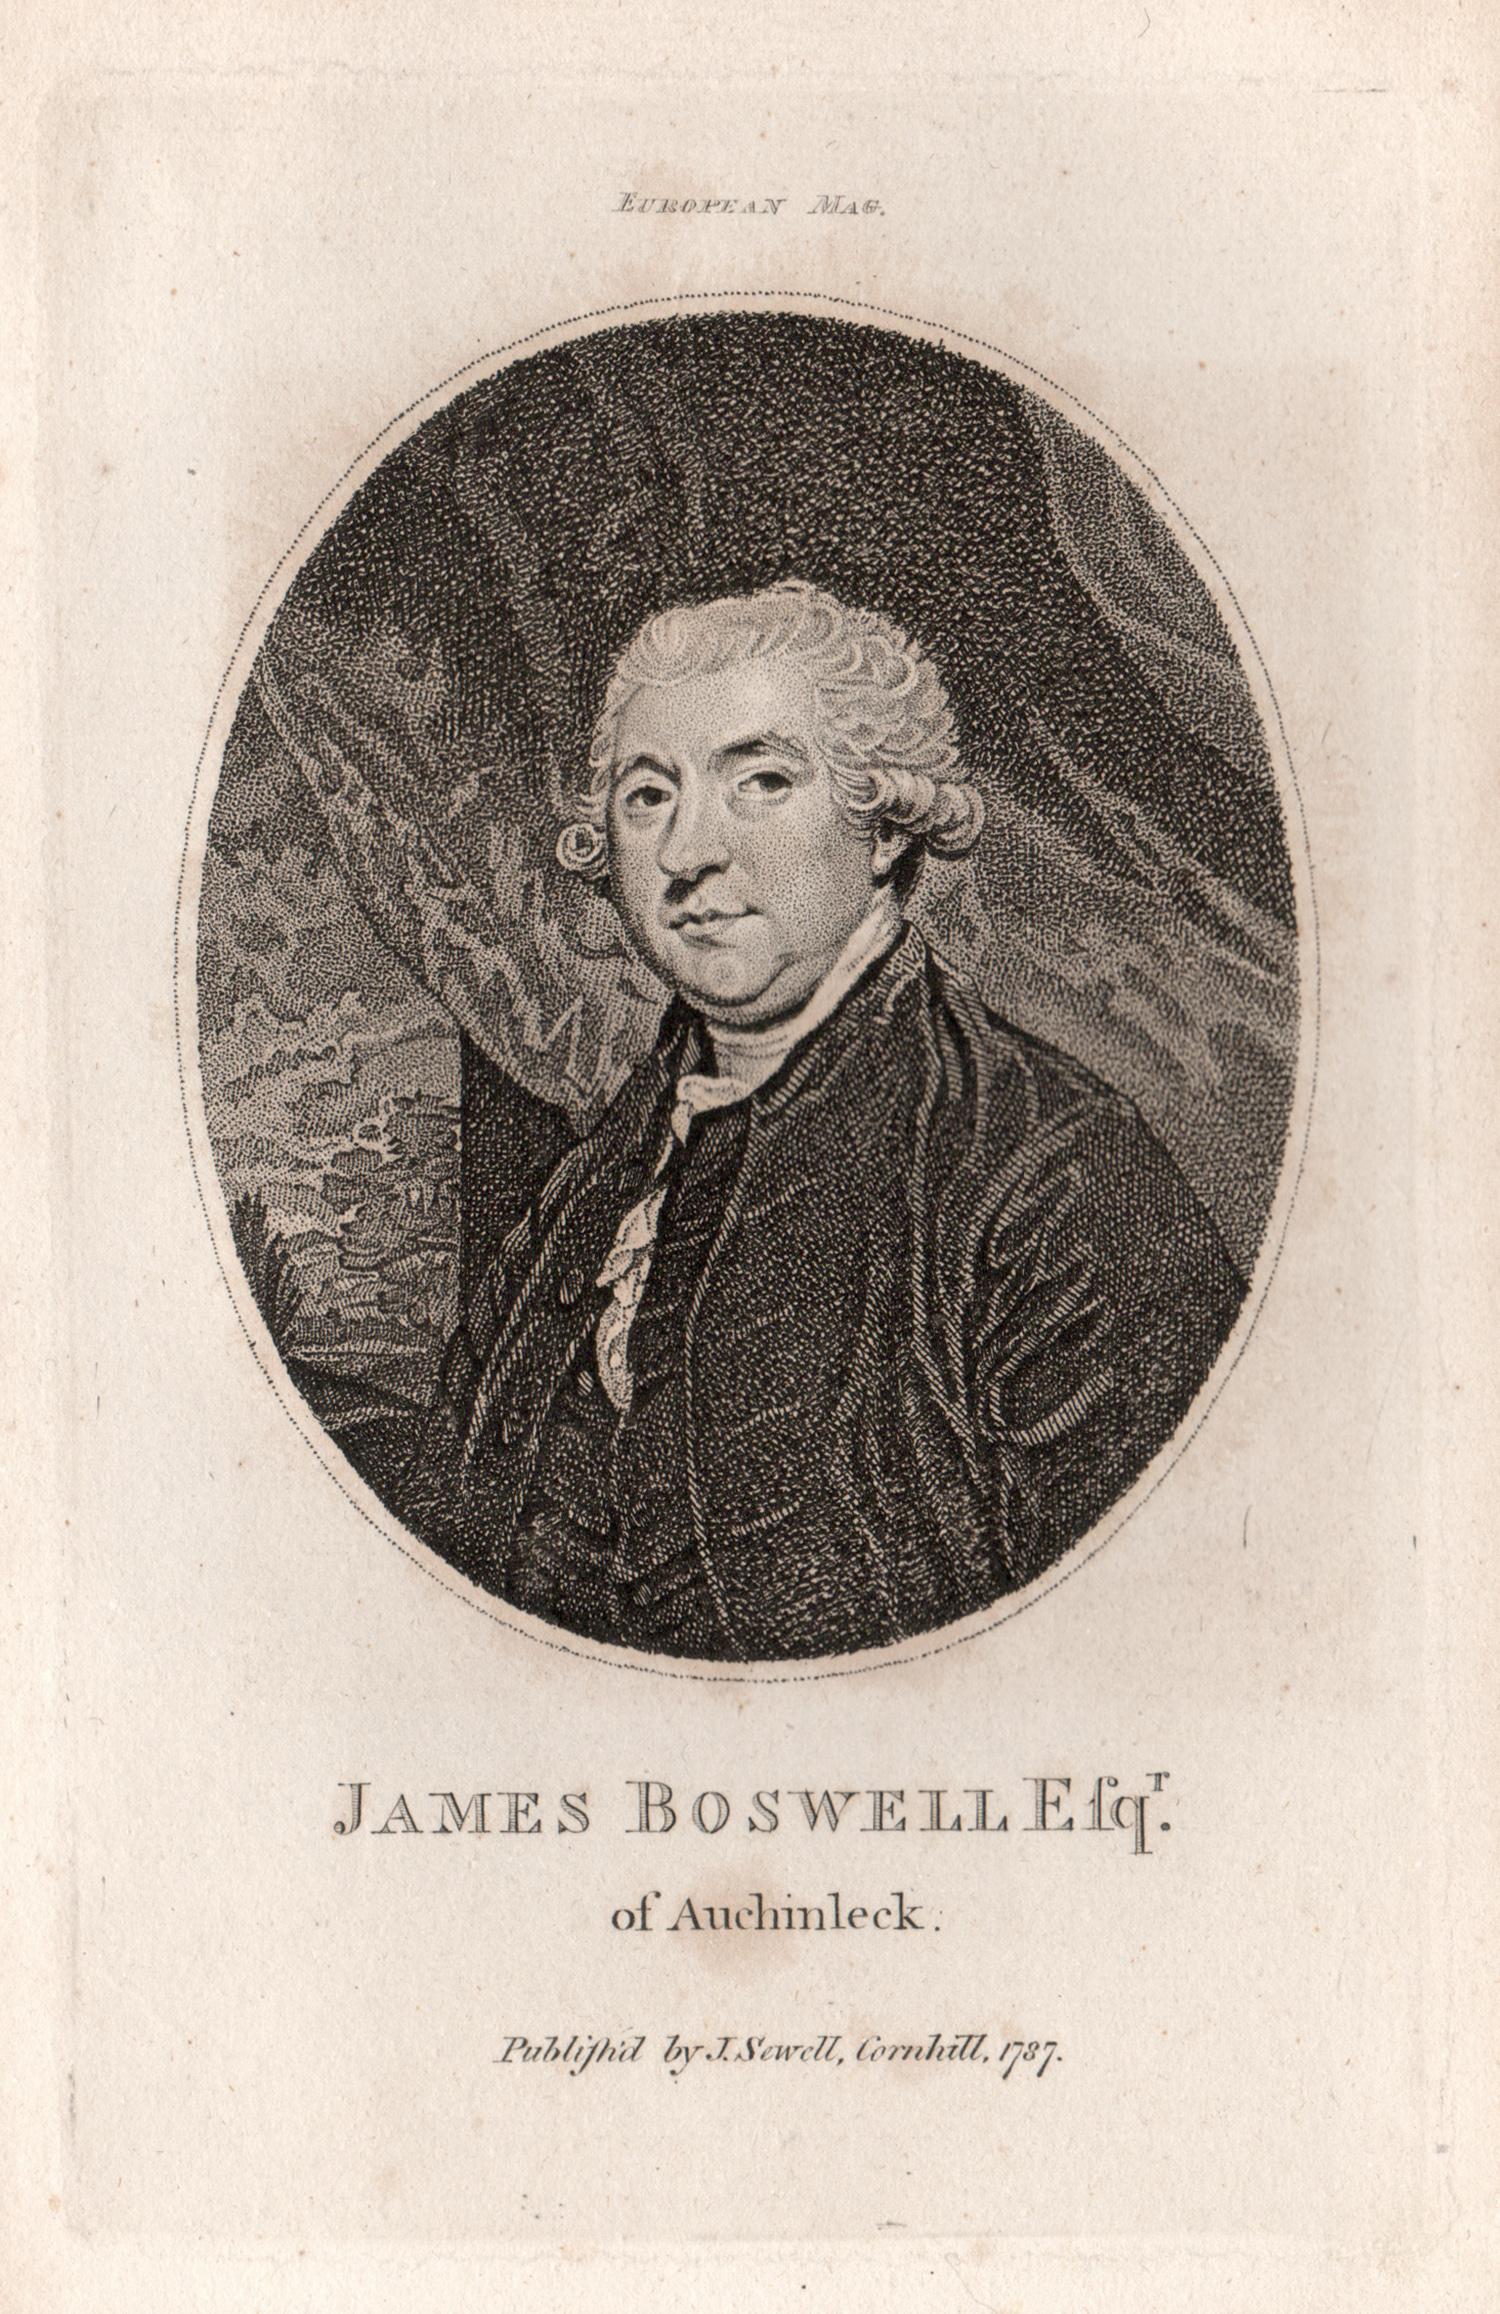 James Boswell, 9th Laird of Auchinleck, diarist, portrait engraving, 1787